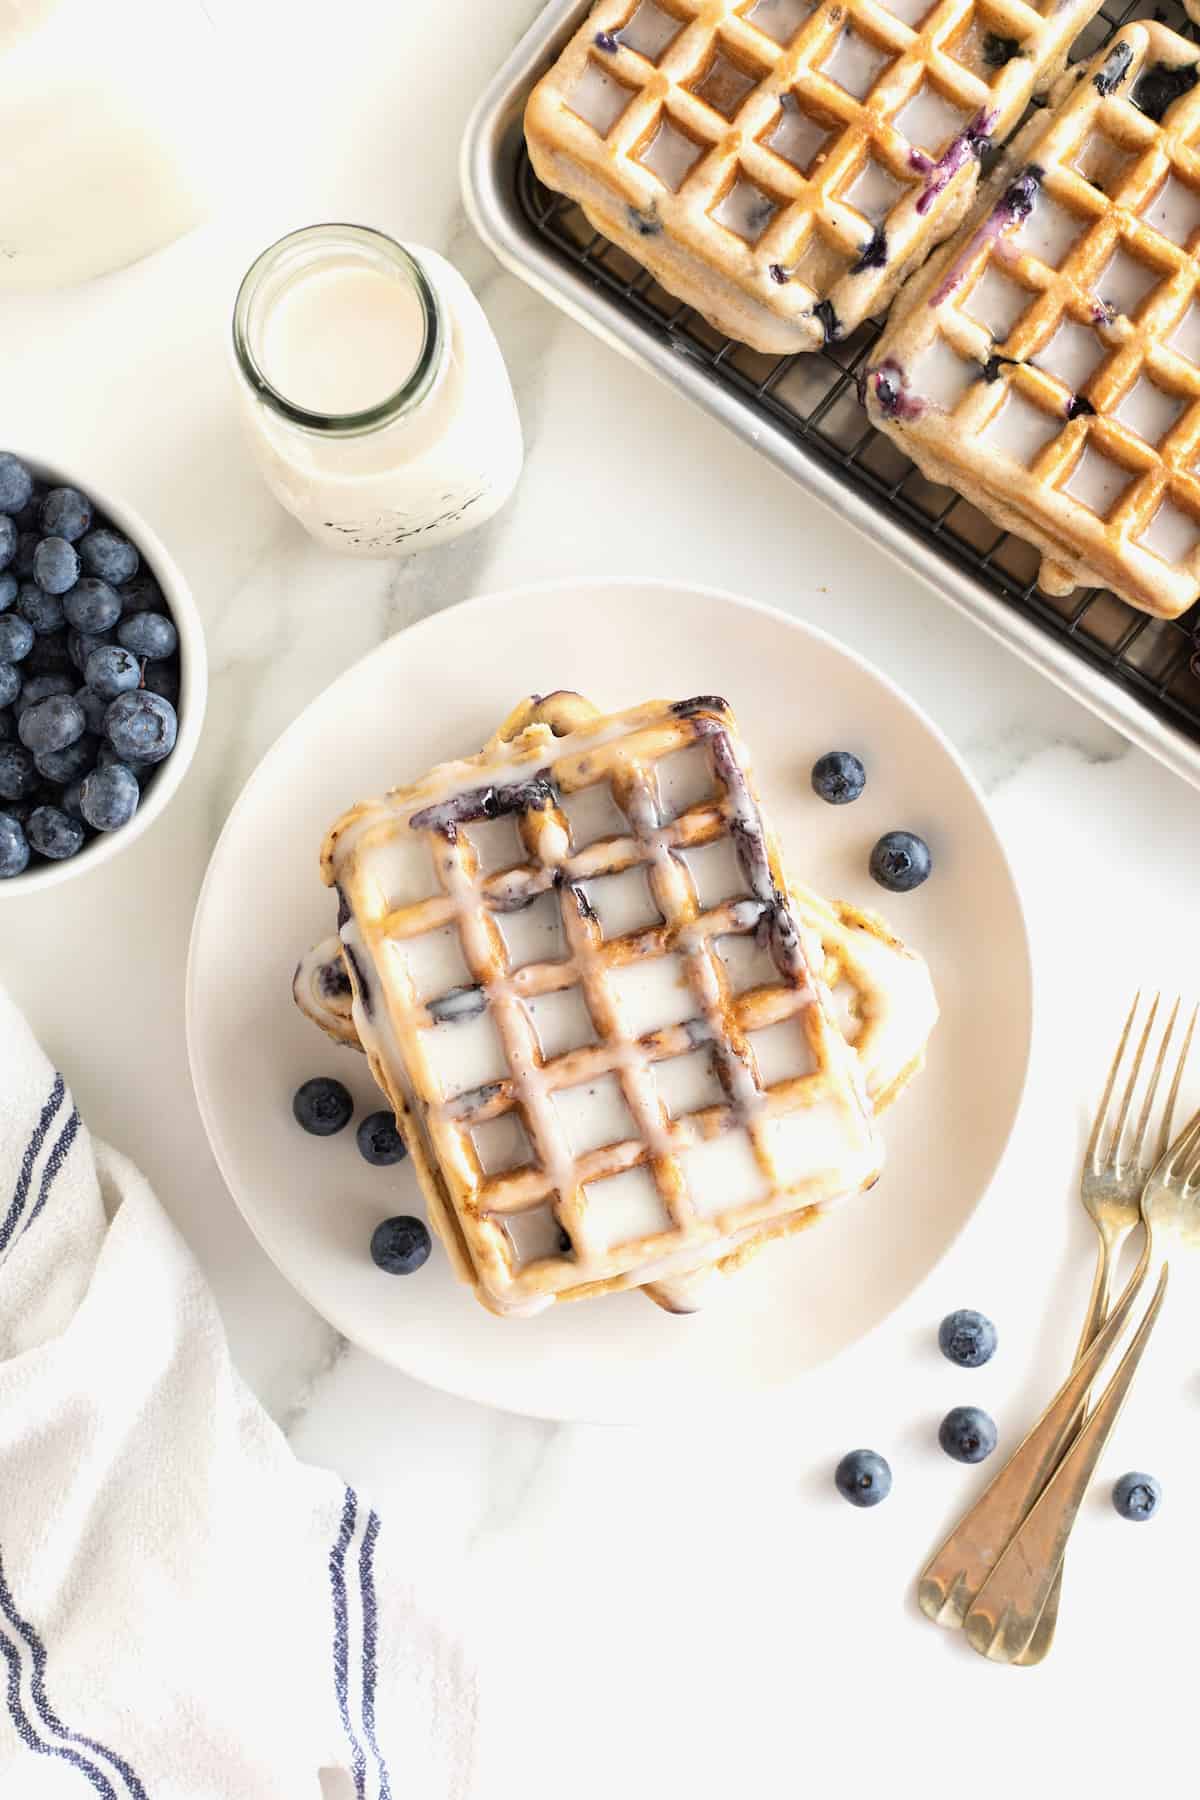 A single blueberry waffle on a white plate with white glaze dripping off and blueberries scattered around it. To the lower right of the plate are two gold toned forks.